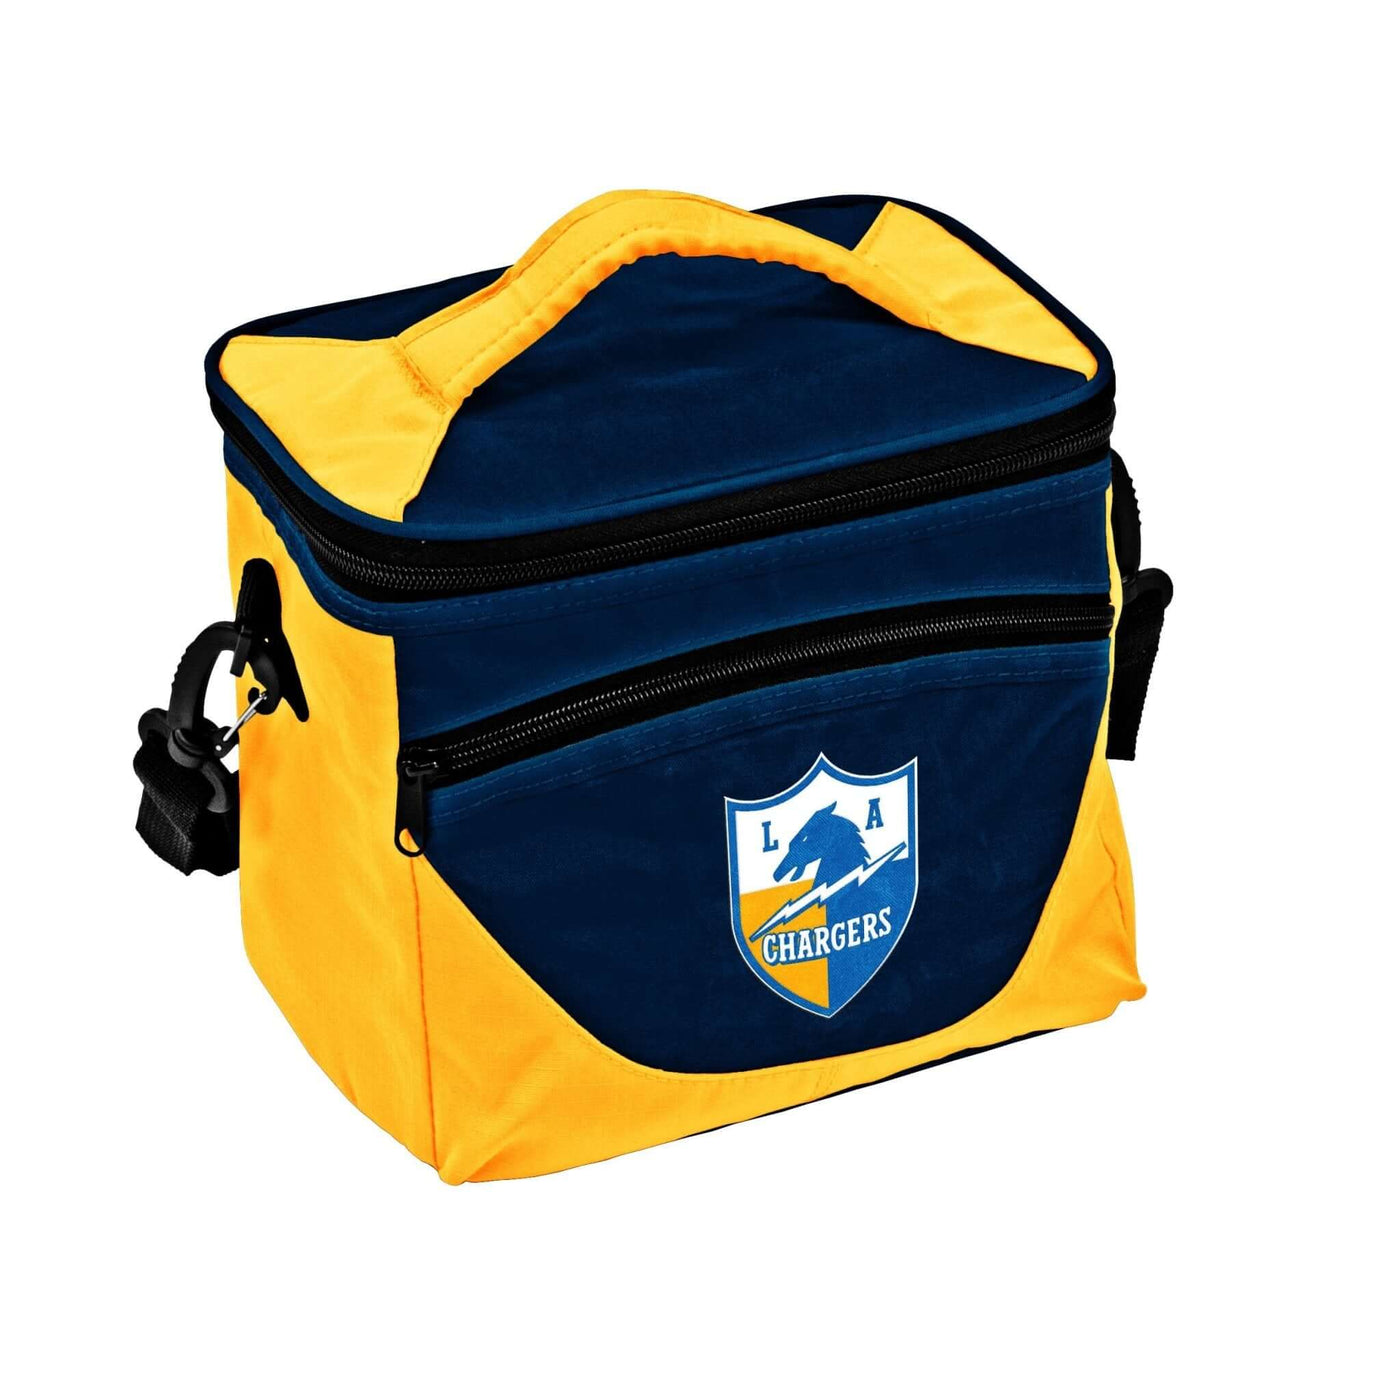 LA Chargers Classic Mark Halftime Lunch Cooler - Logo Brands